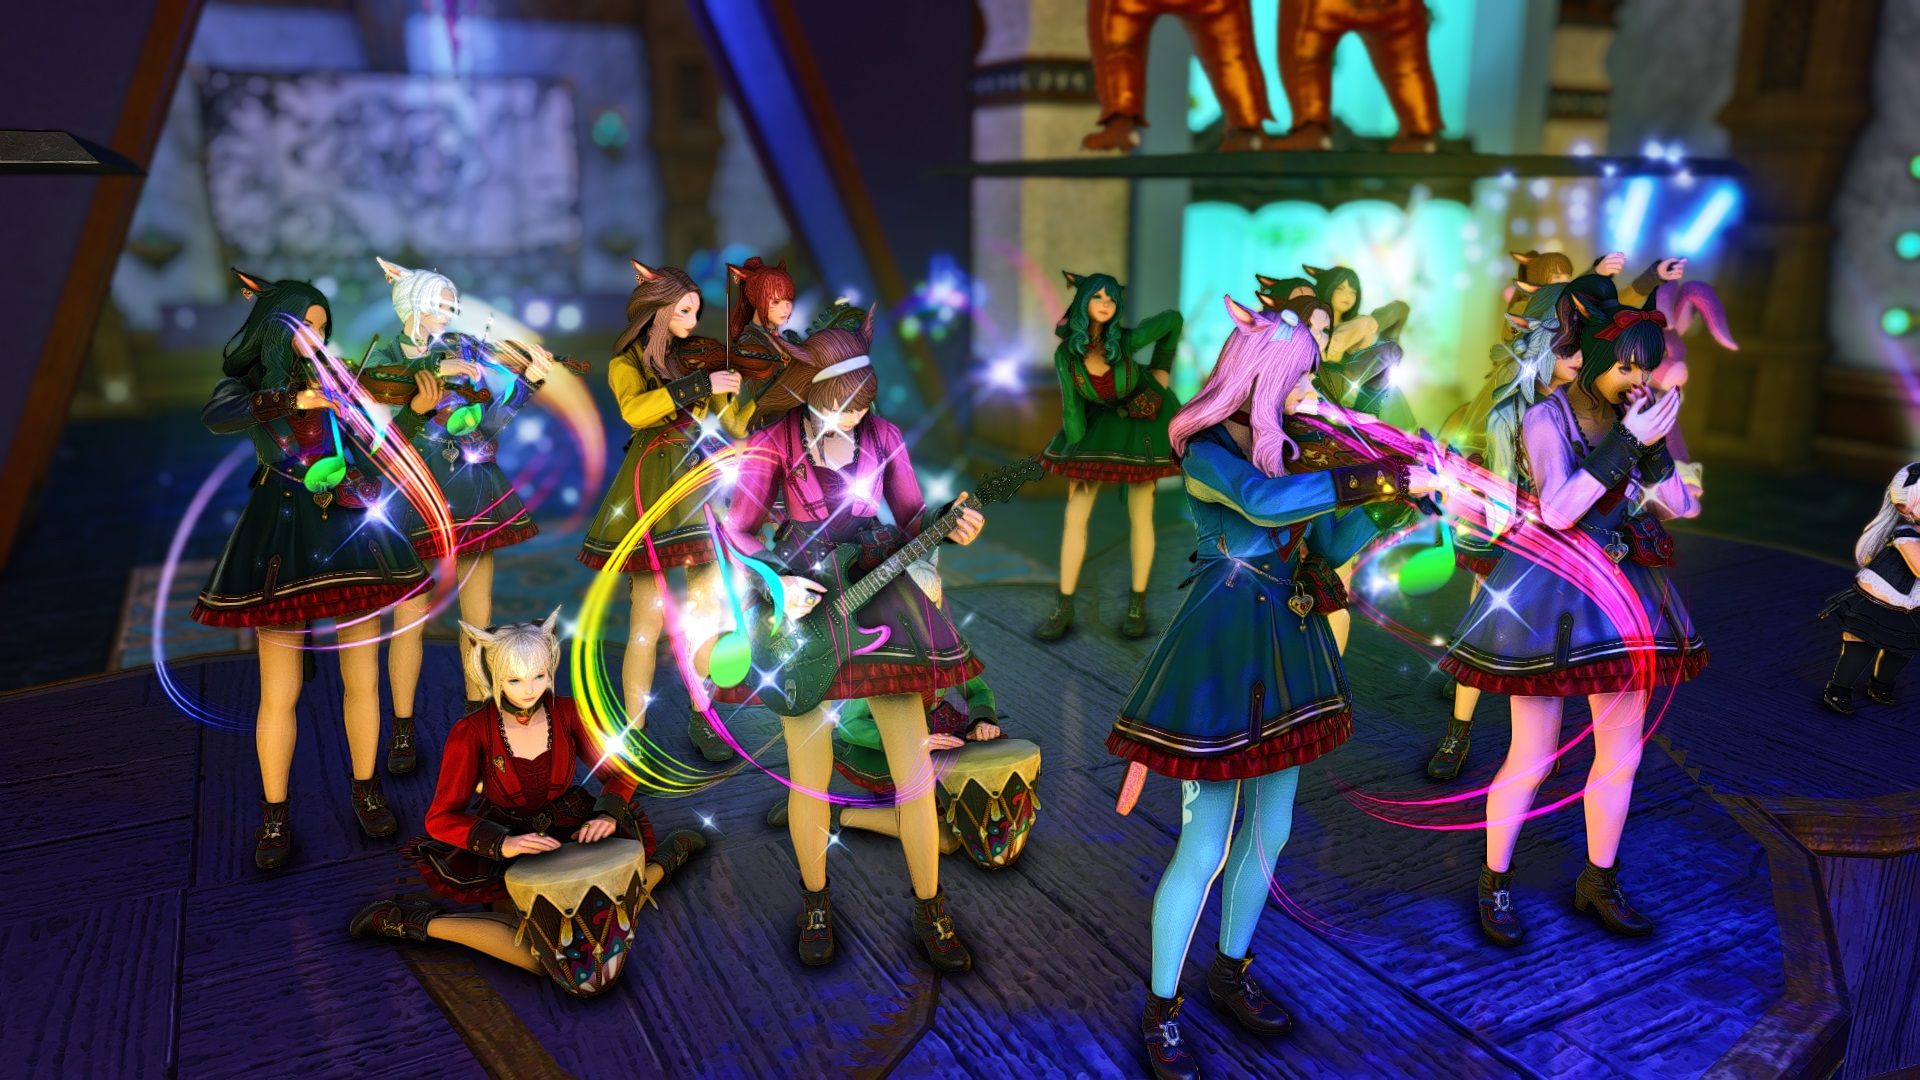 The Hissy Fits Bard band playing in Final Fantasy 14.